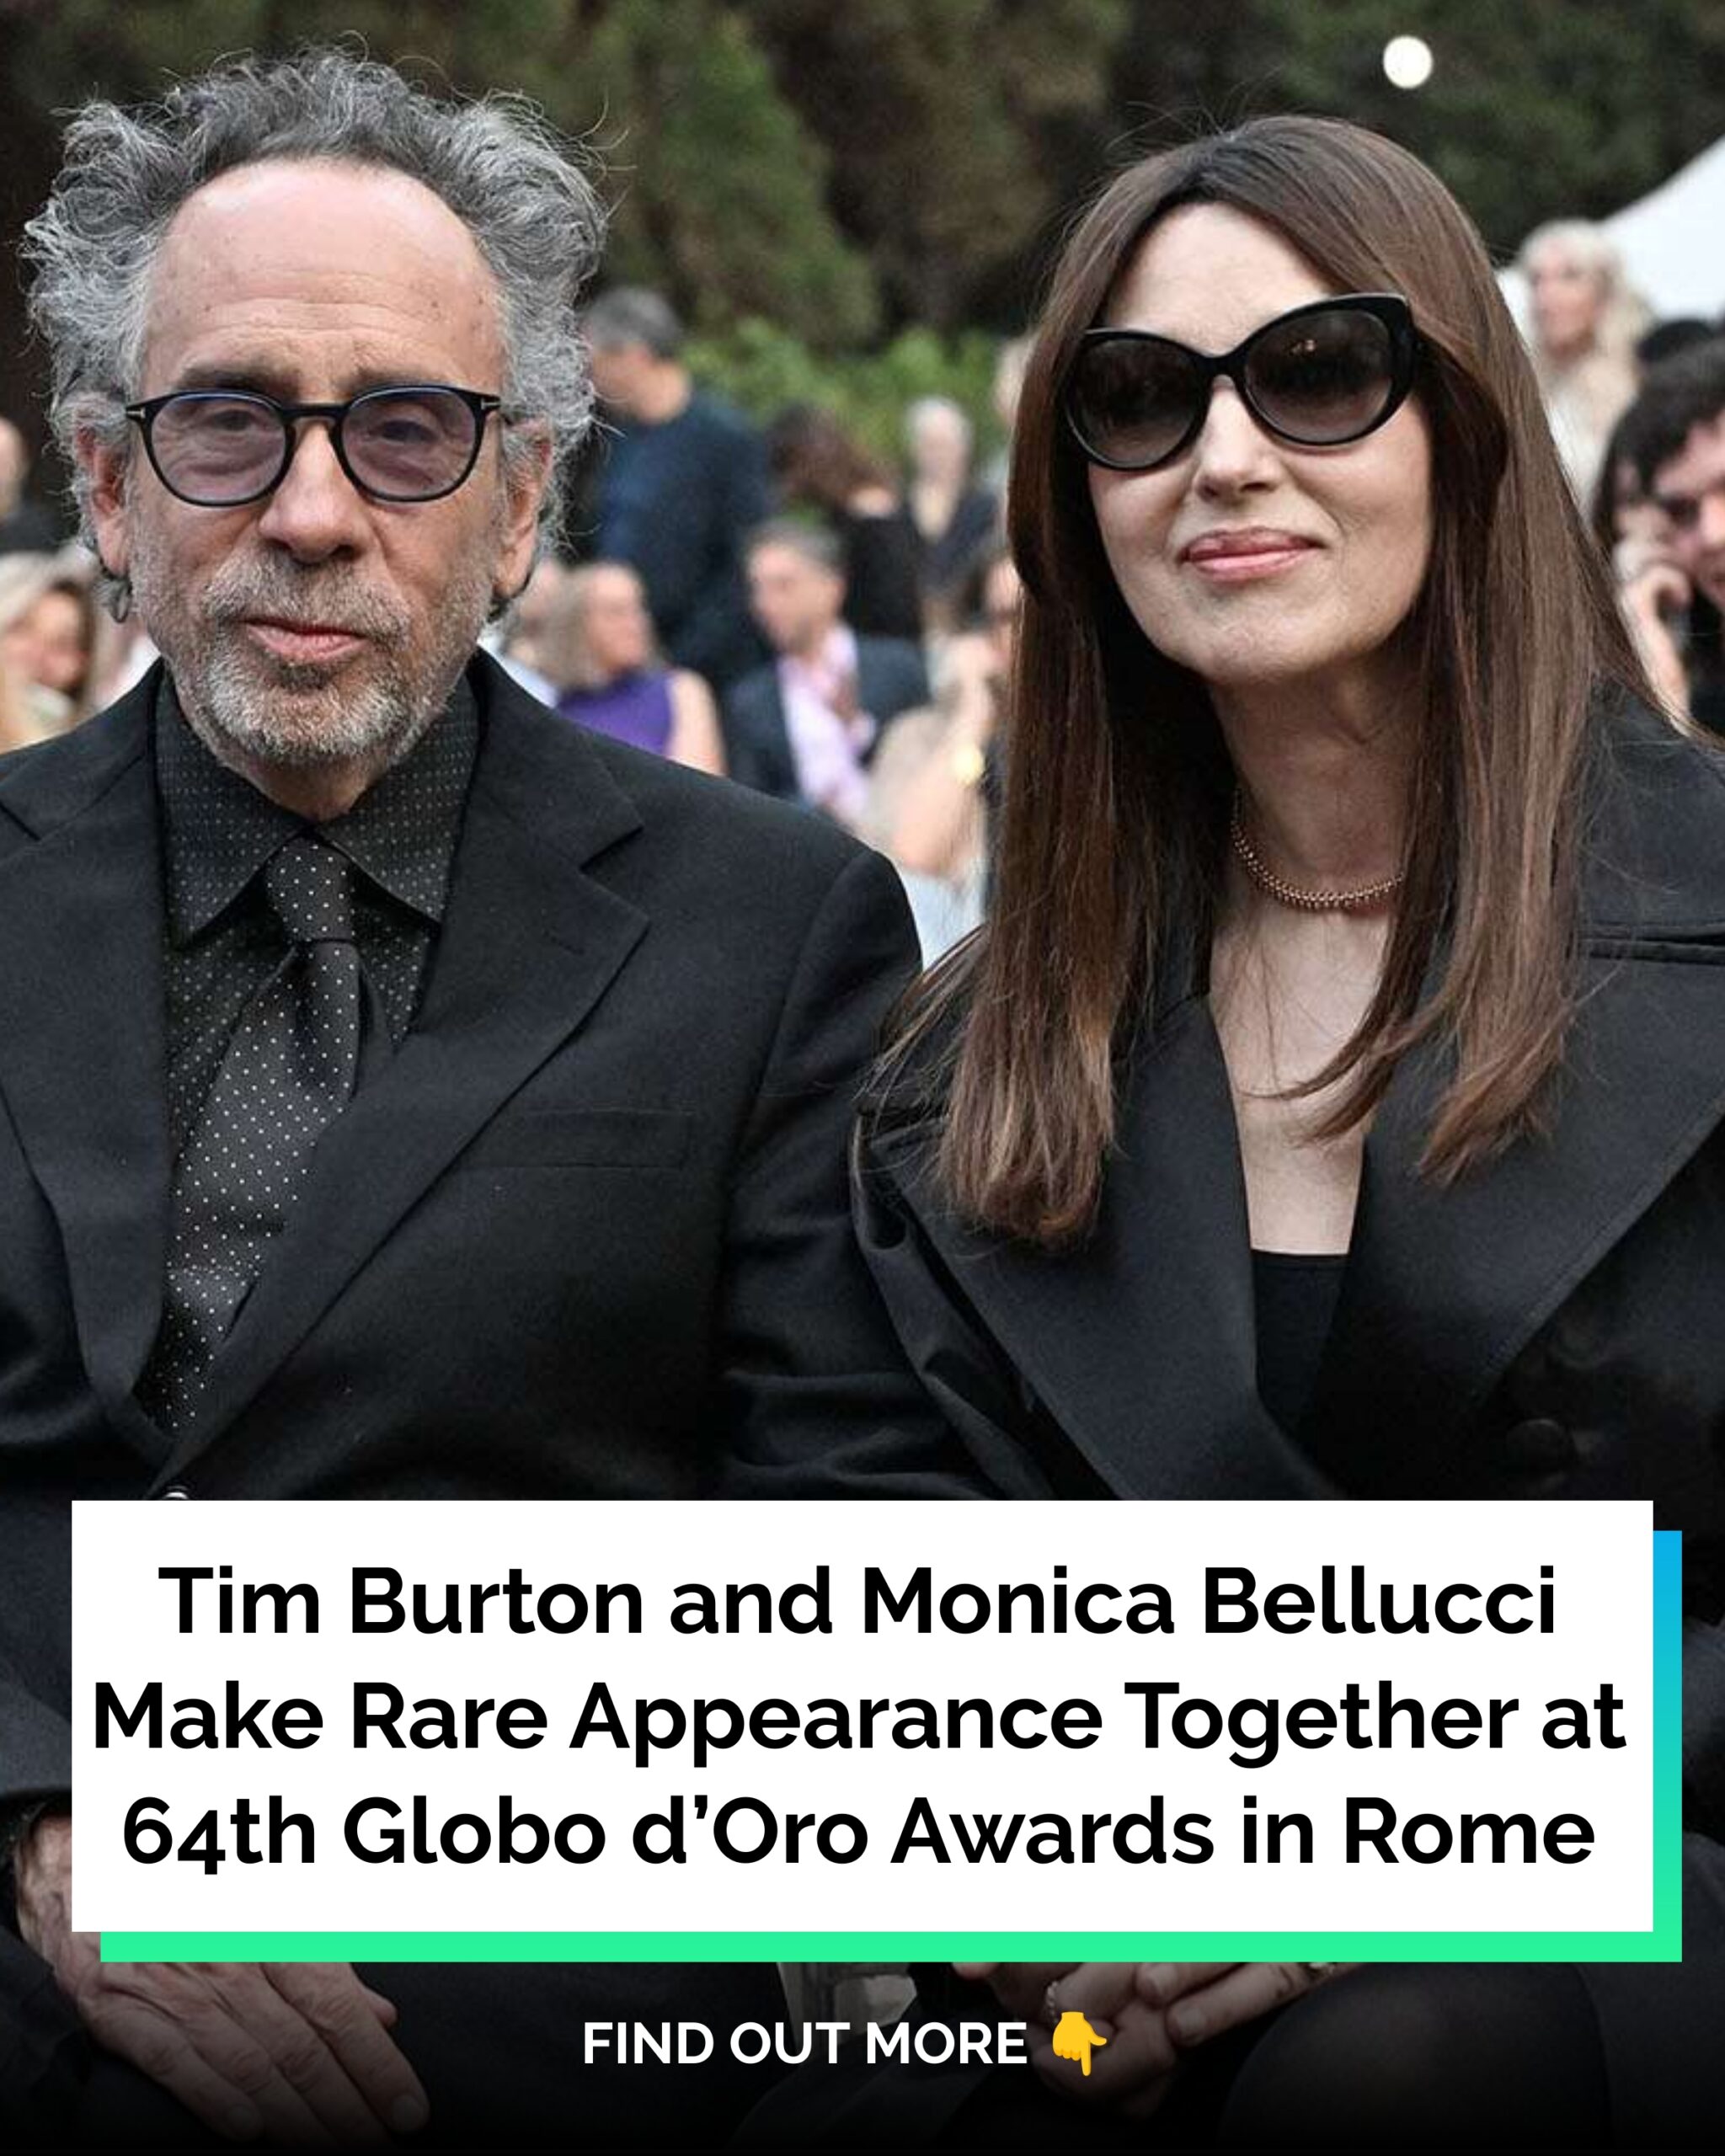 Tim Burton and Monica Bellucci Make Rare Appearance Together at 64th Globo d’Oro Awards in Rome